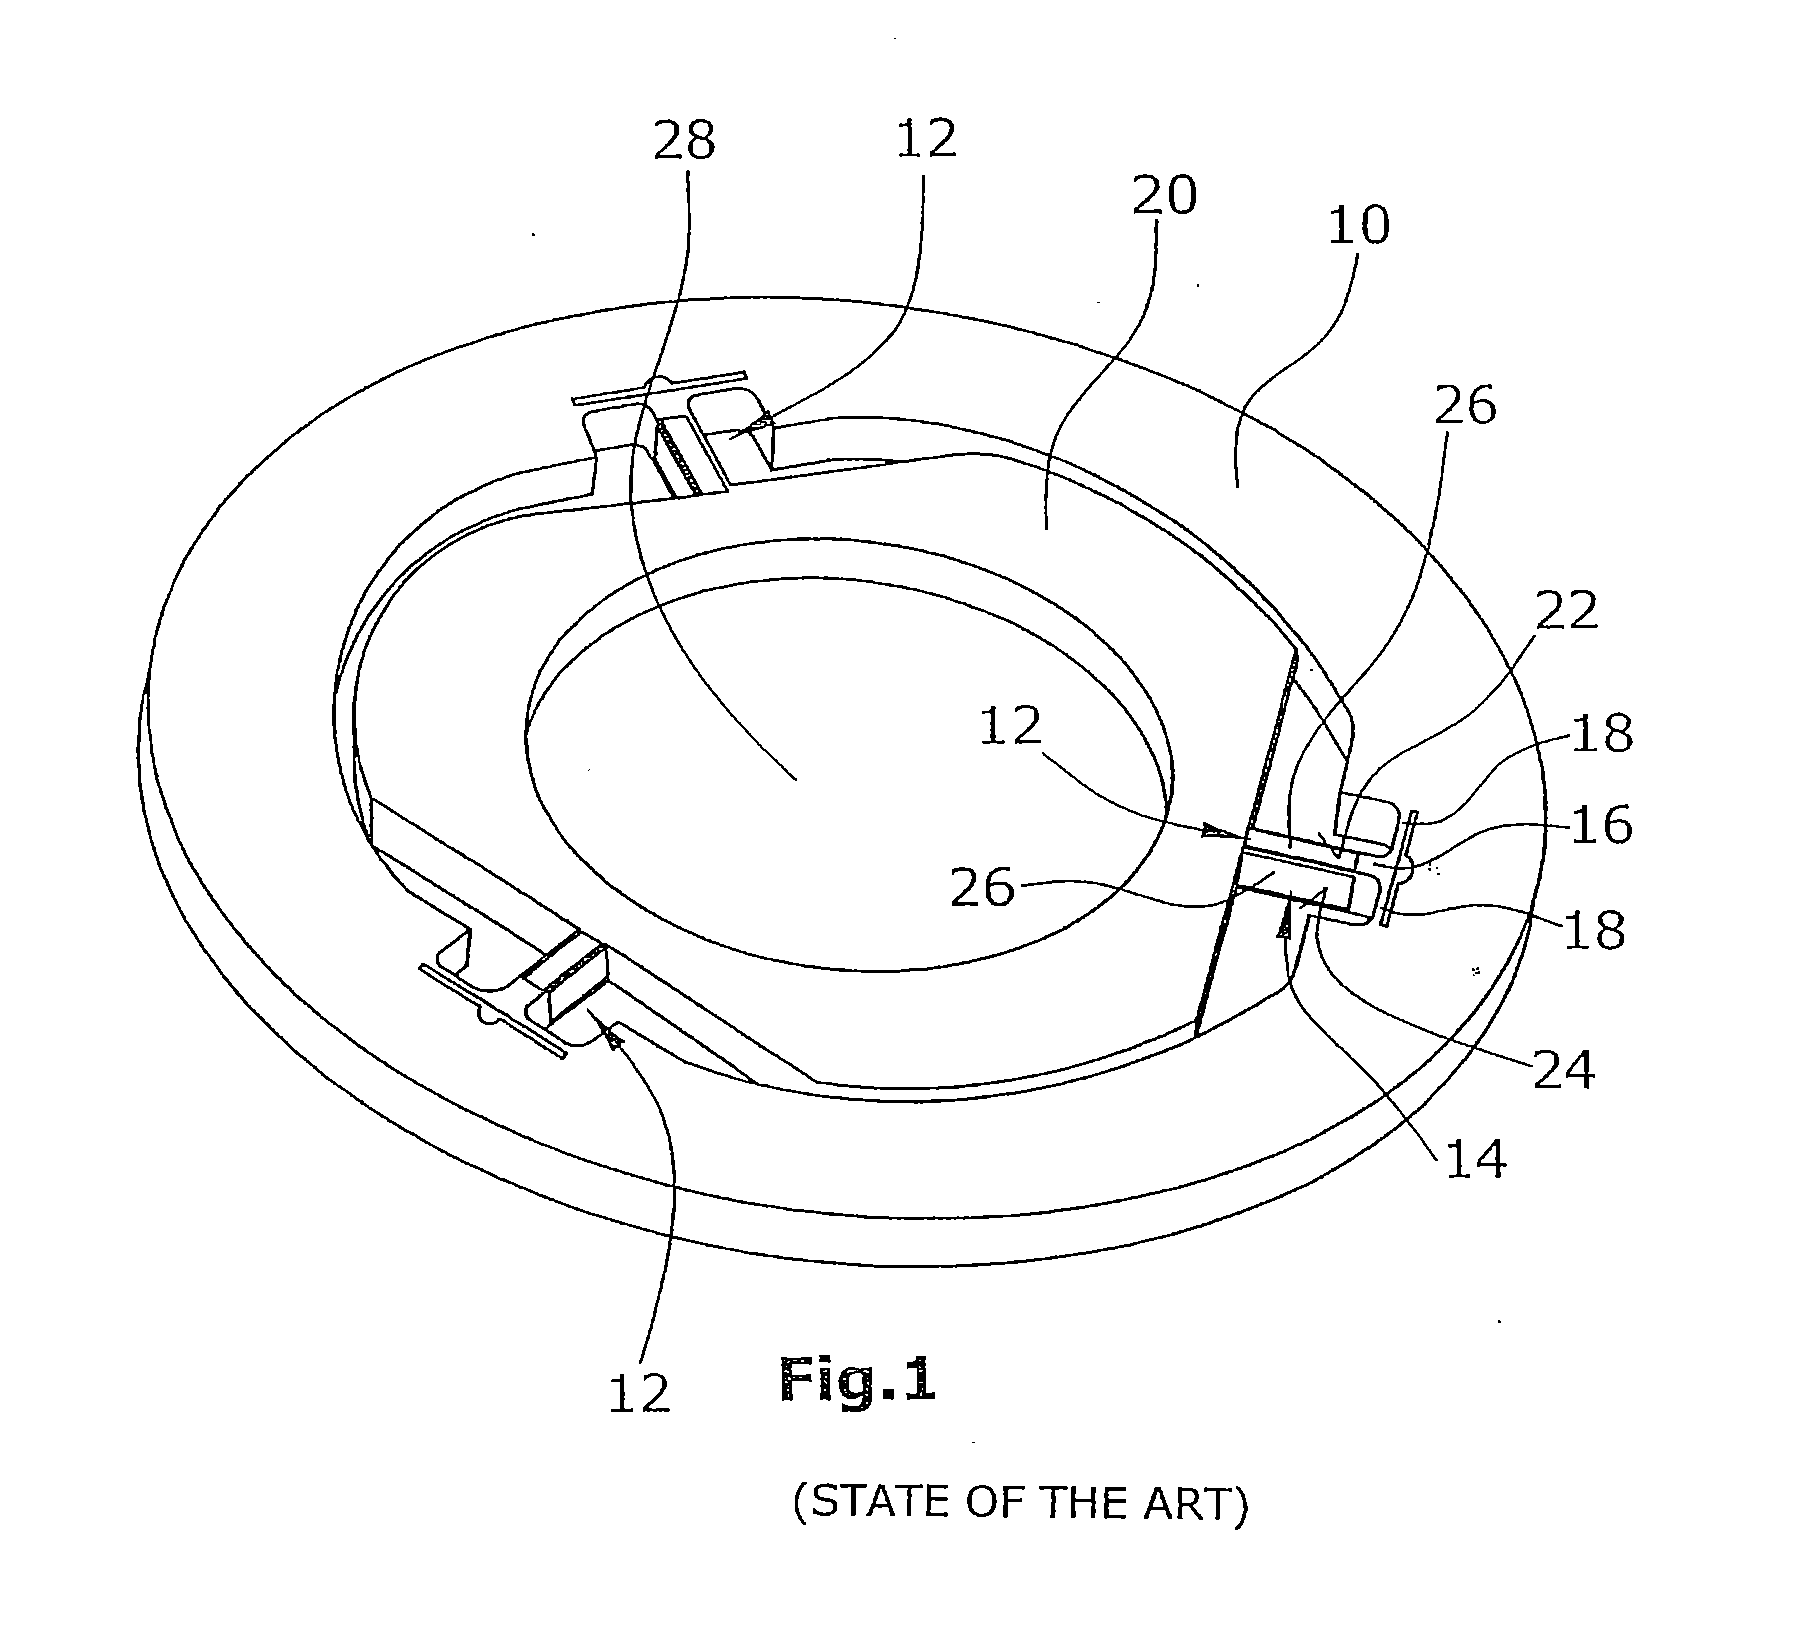 Force/moment sensor for measurment of forces and moments